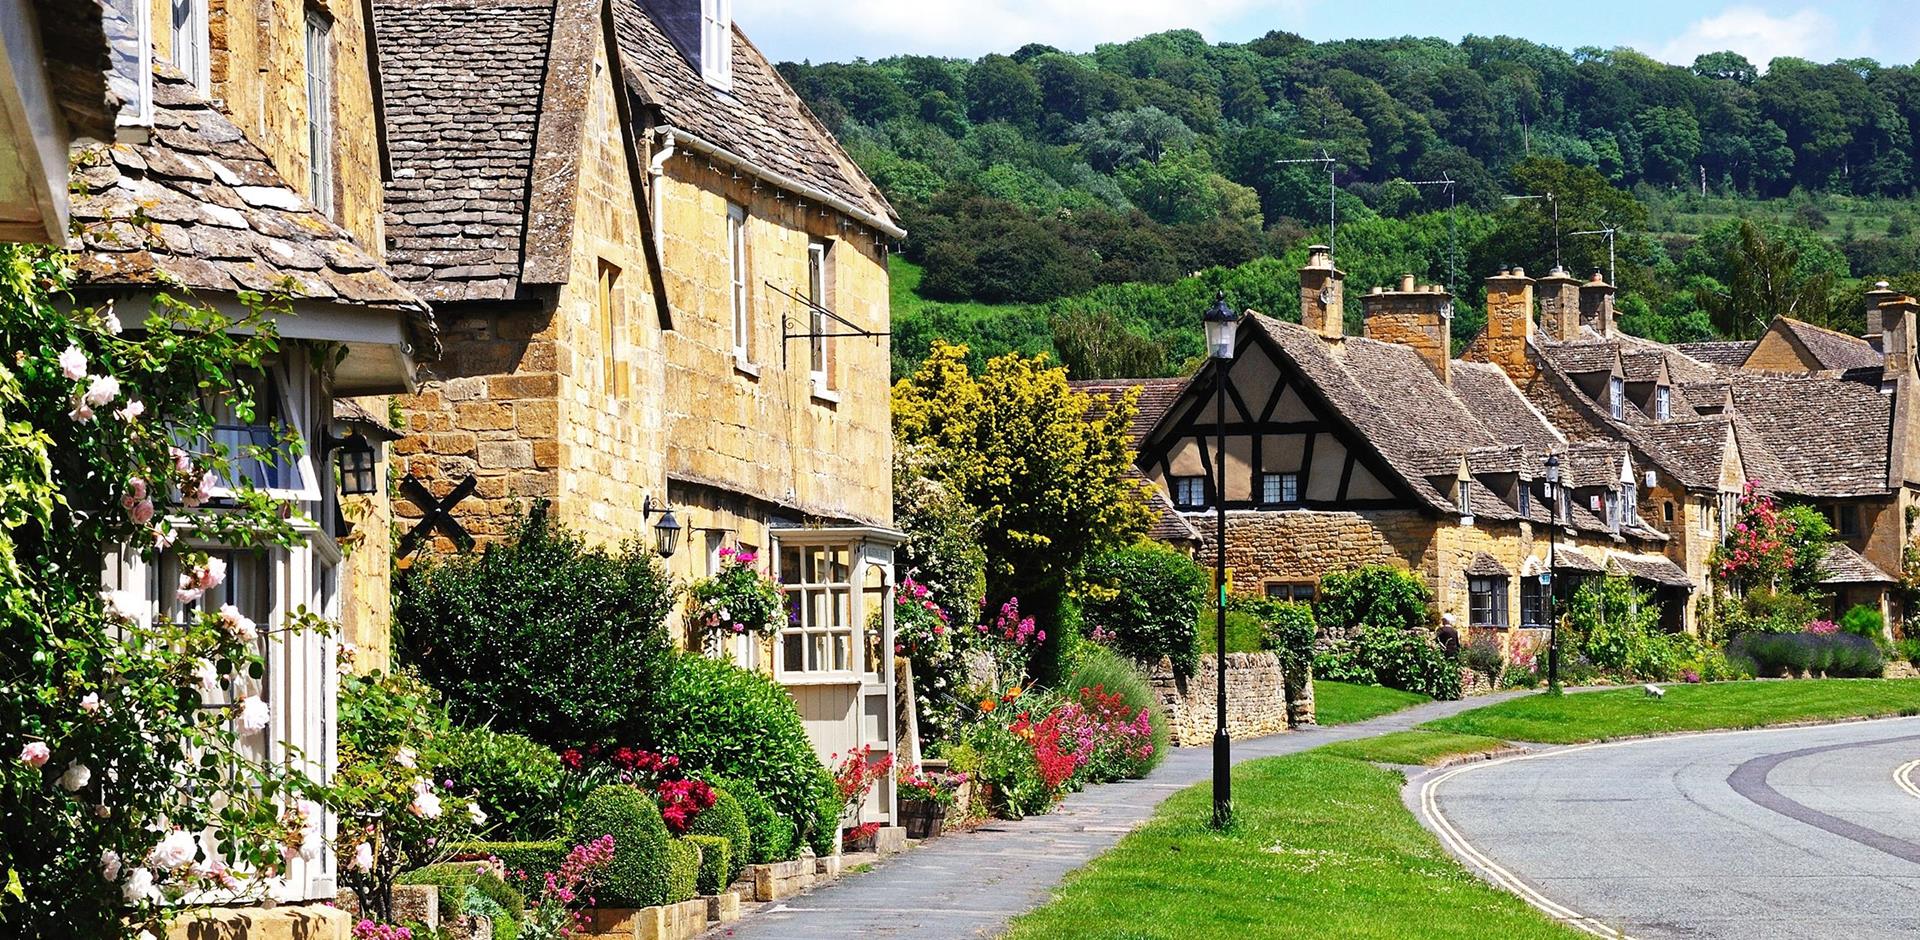 The cotswolds. UK